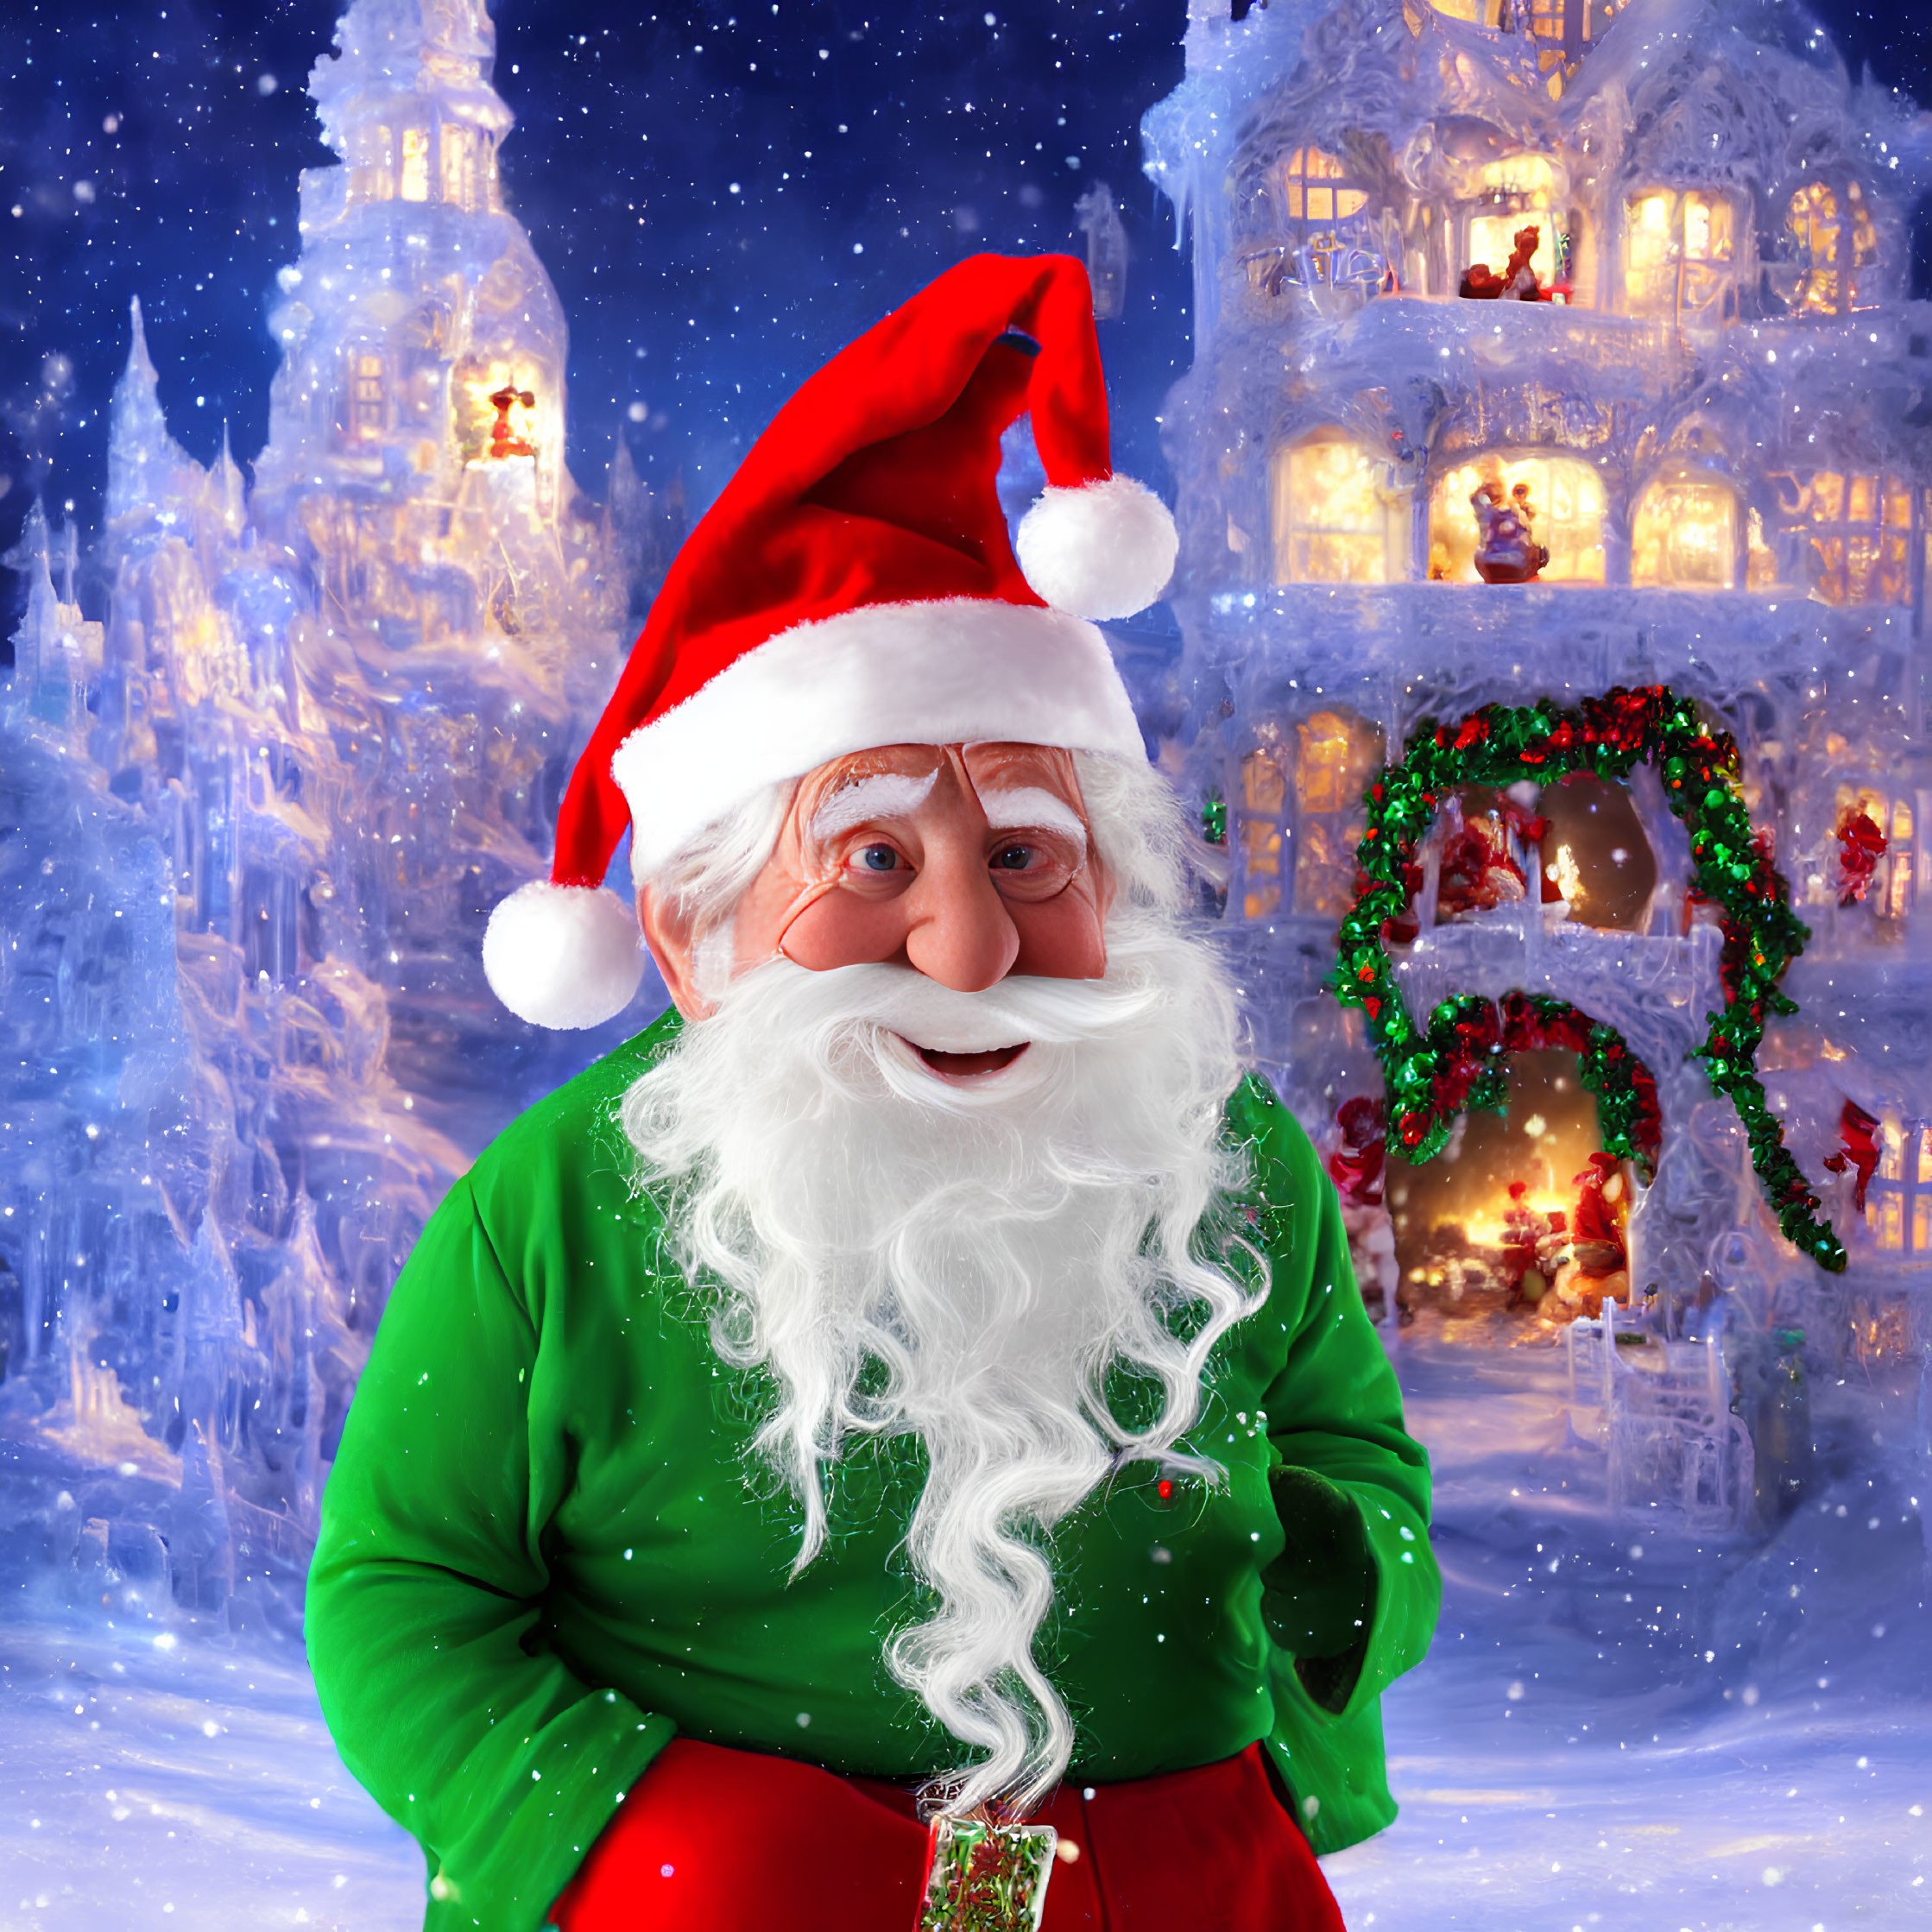 Cheerful Santa Claus with white beard, green shirt, holding gift, snowy village background